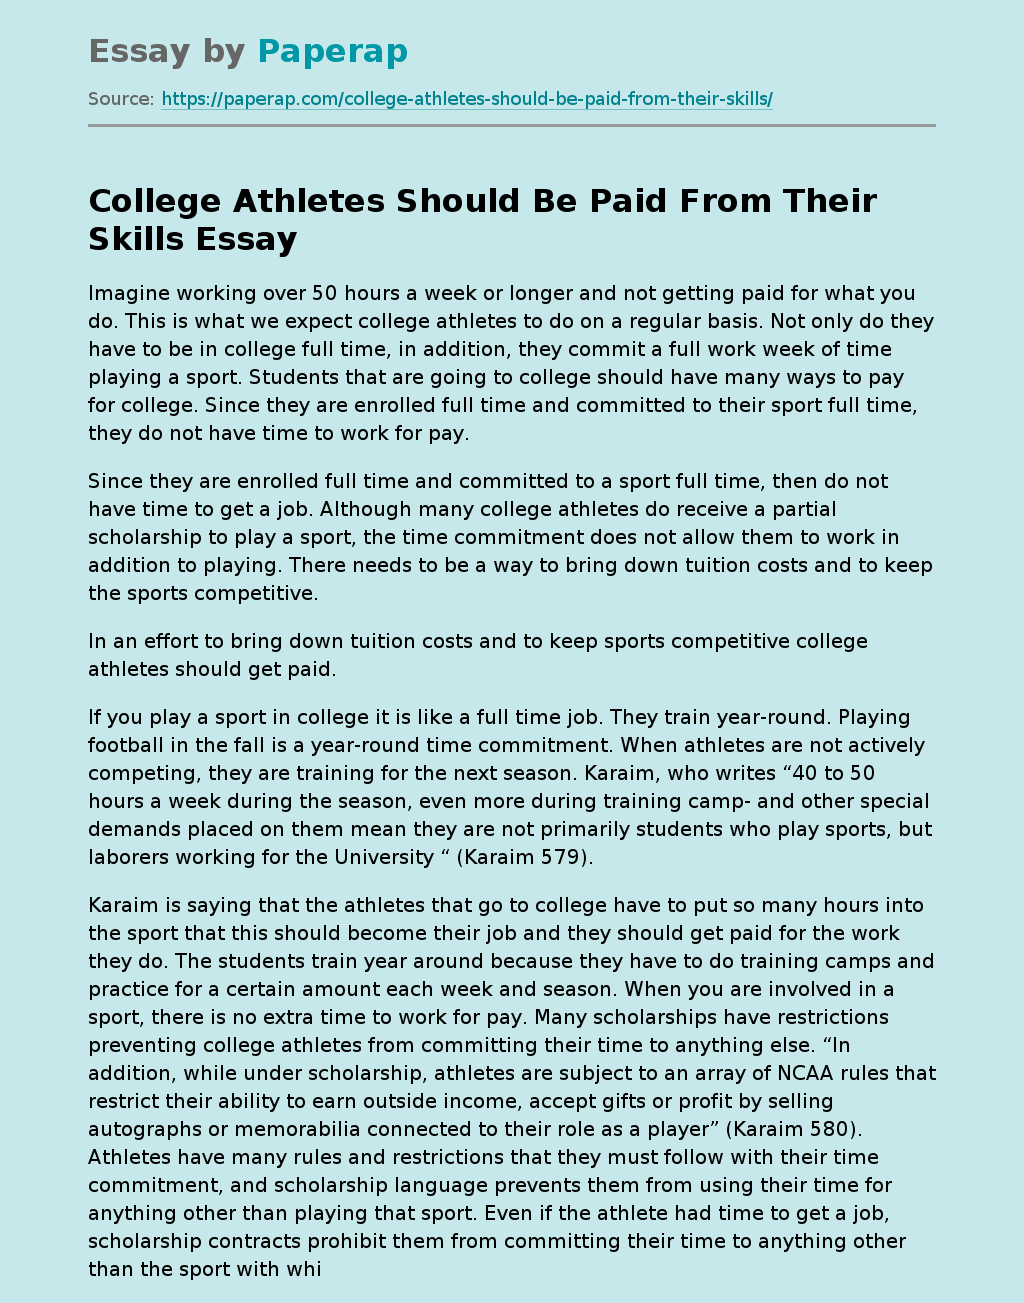 sample essay on pay for college athletes